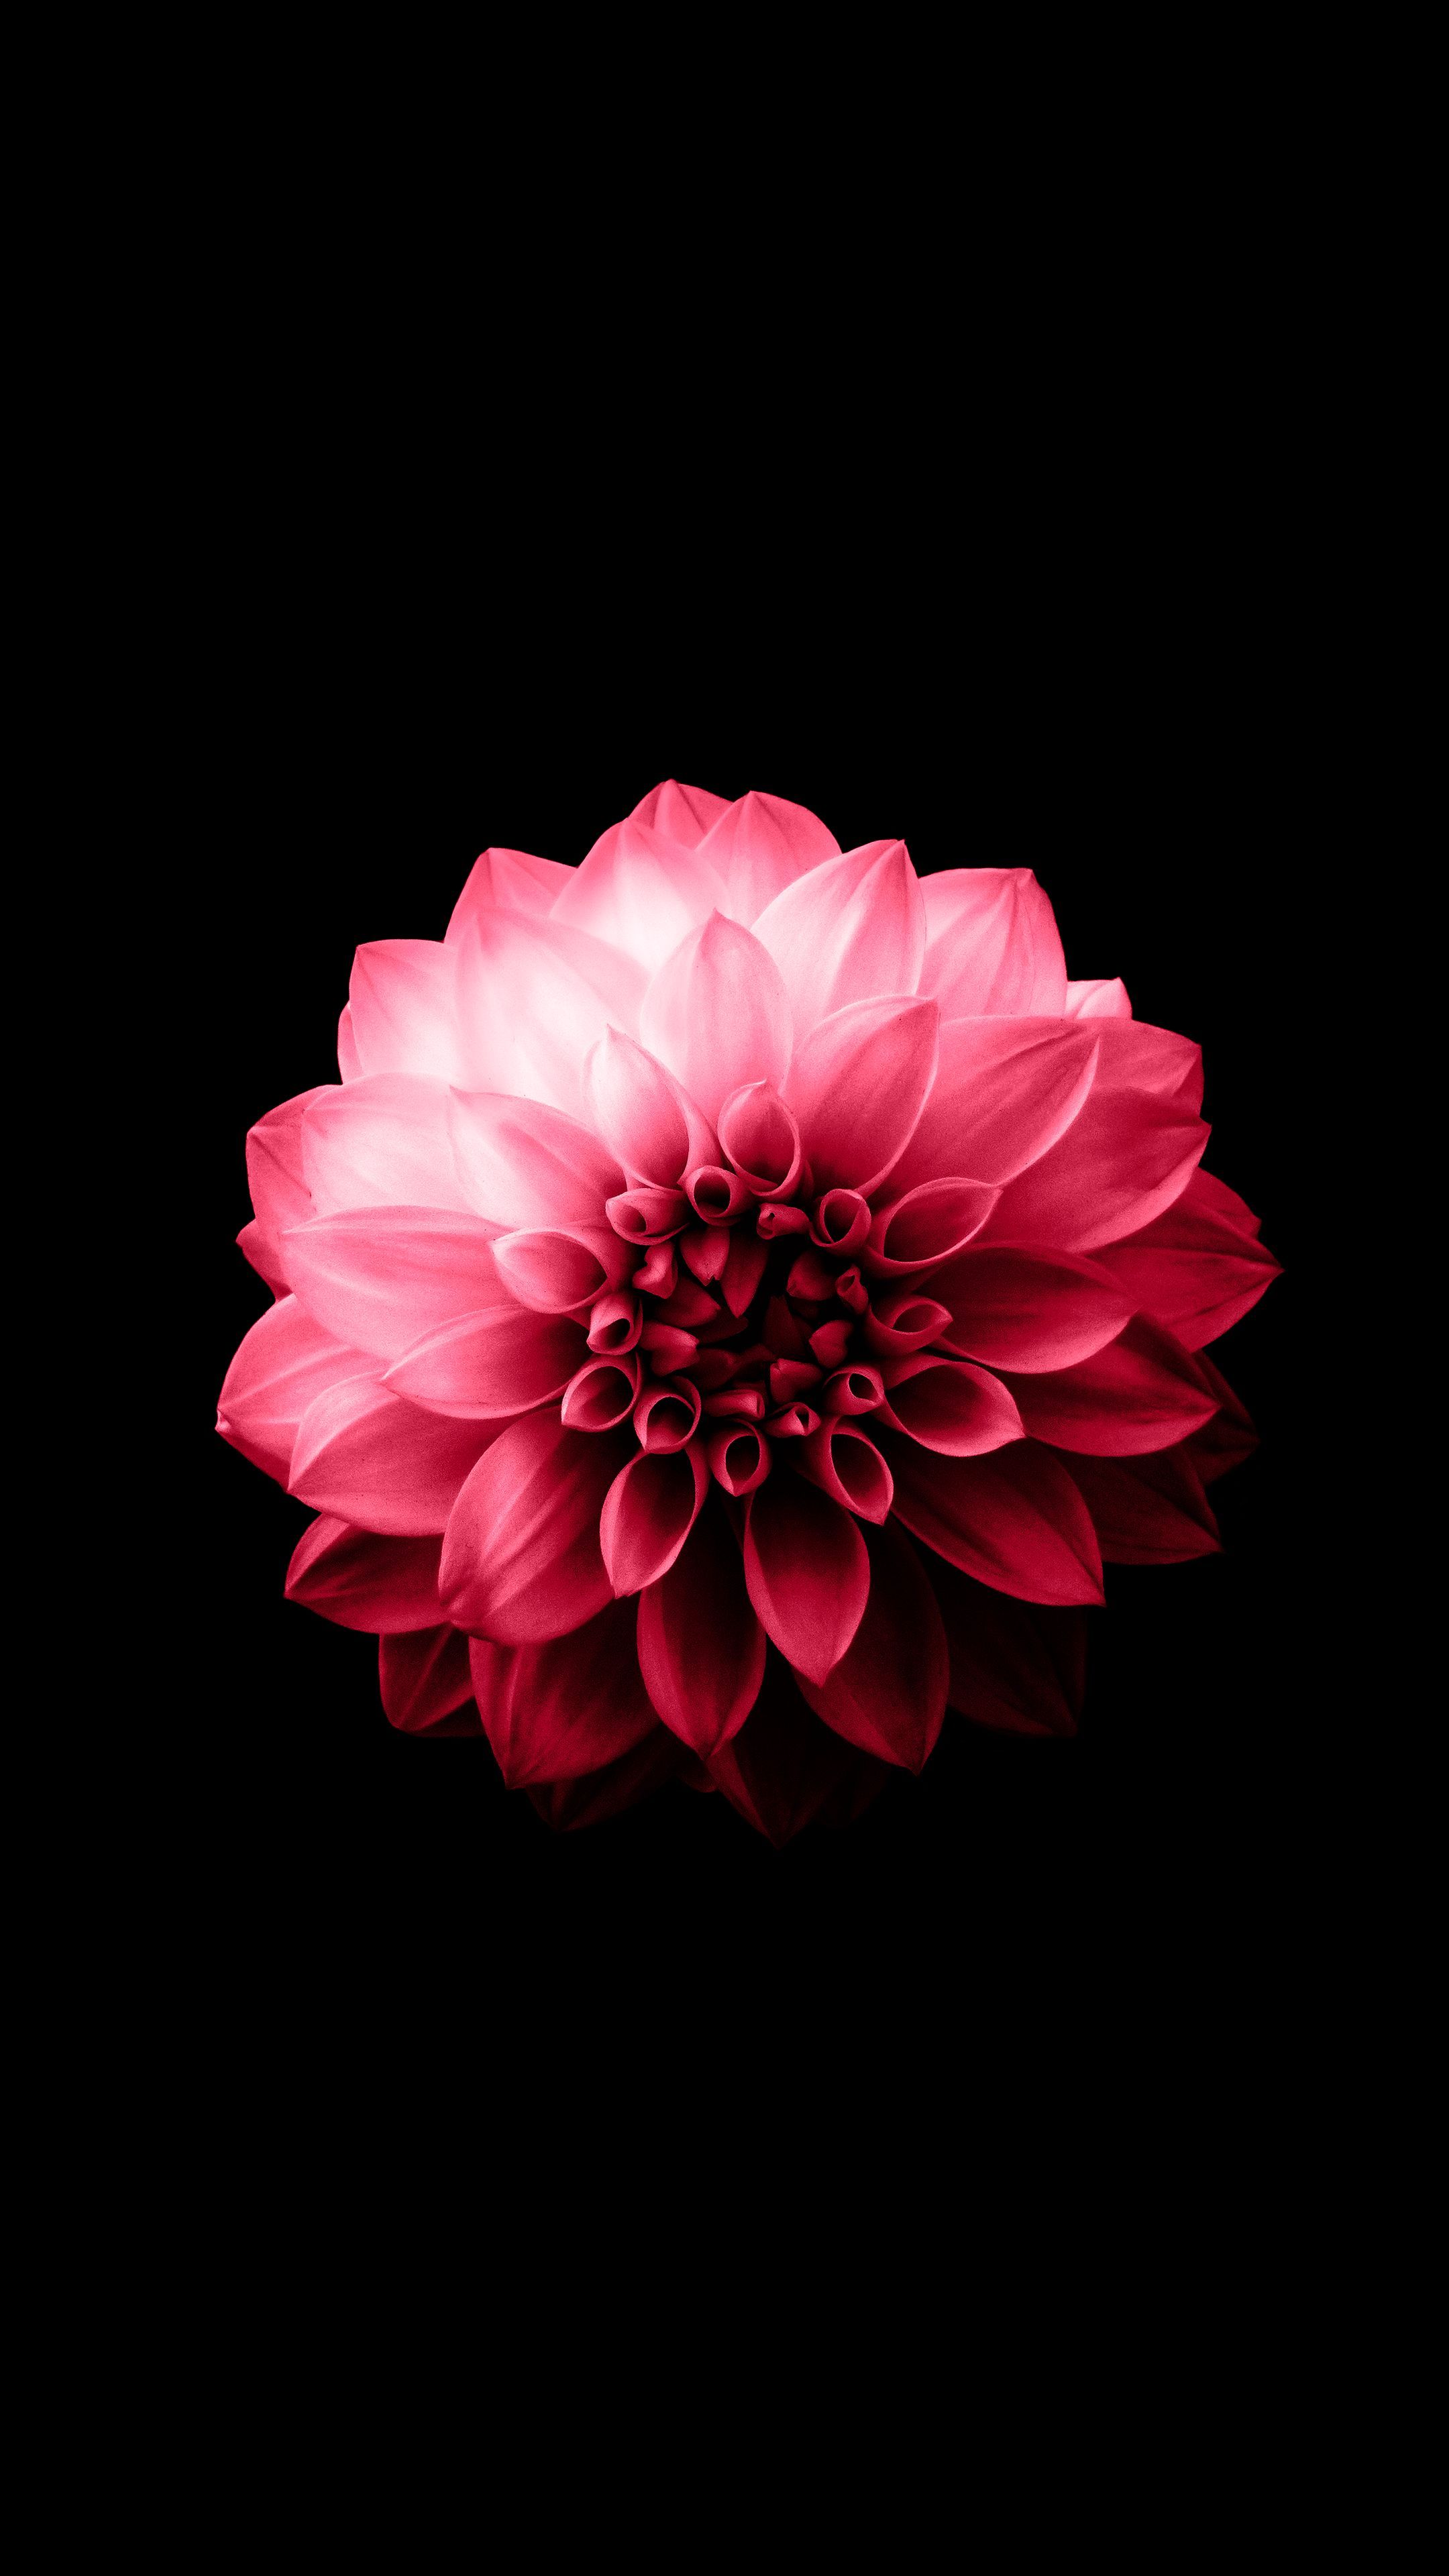 Amoled Wallpaper 4K Flower / Flower Amoled Wallpaper / Every Day New Picture And Just Beautiful Wallpaper For Your Desktop Flowers Completely Free. Gwyncfc Image